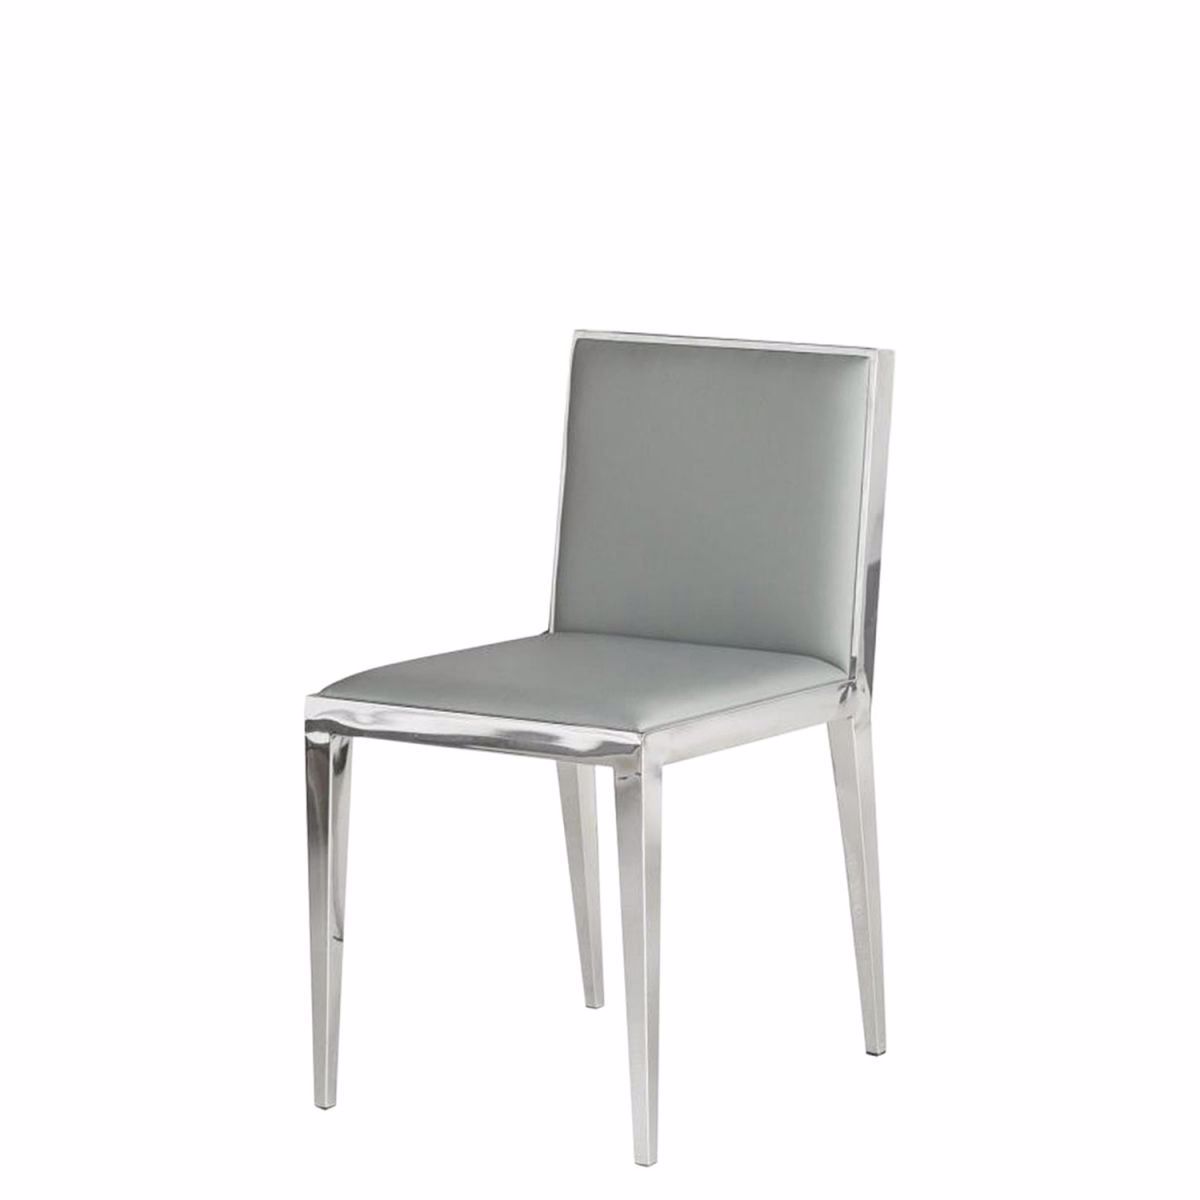 Victoria Dining Chair Inspiration Furniture Vancouver Bc